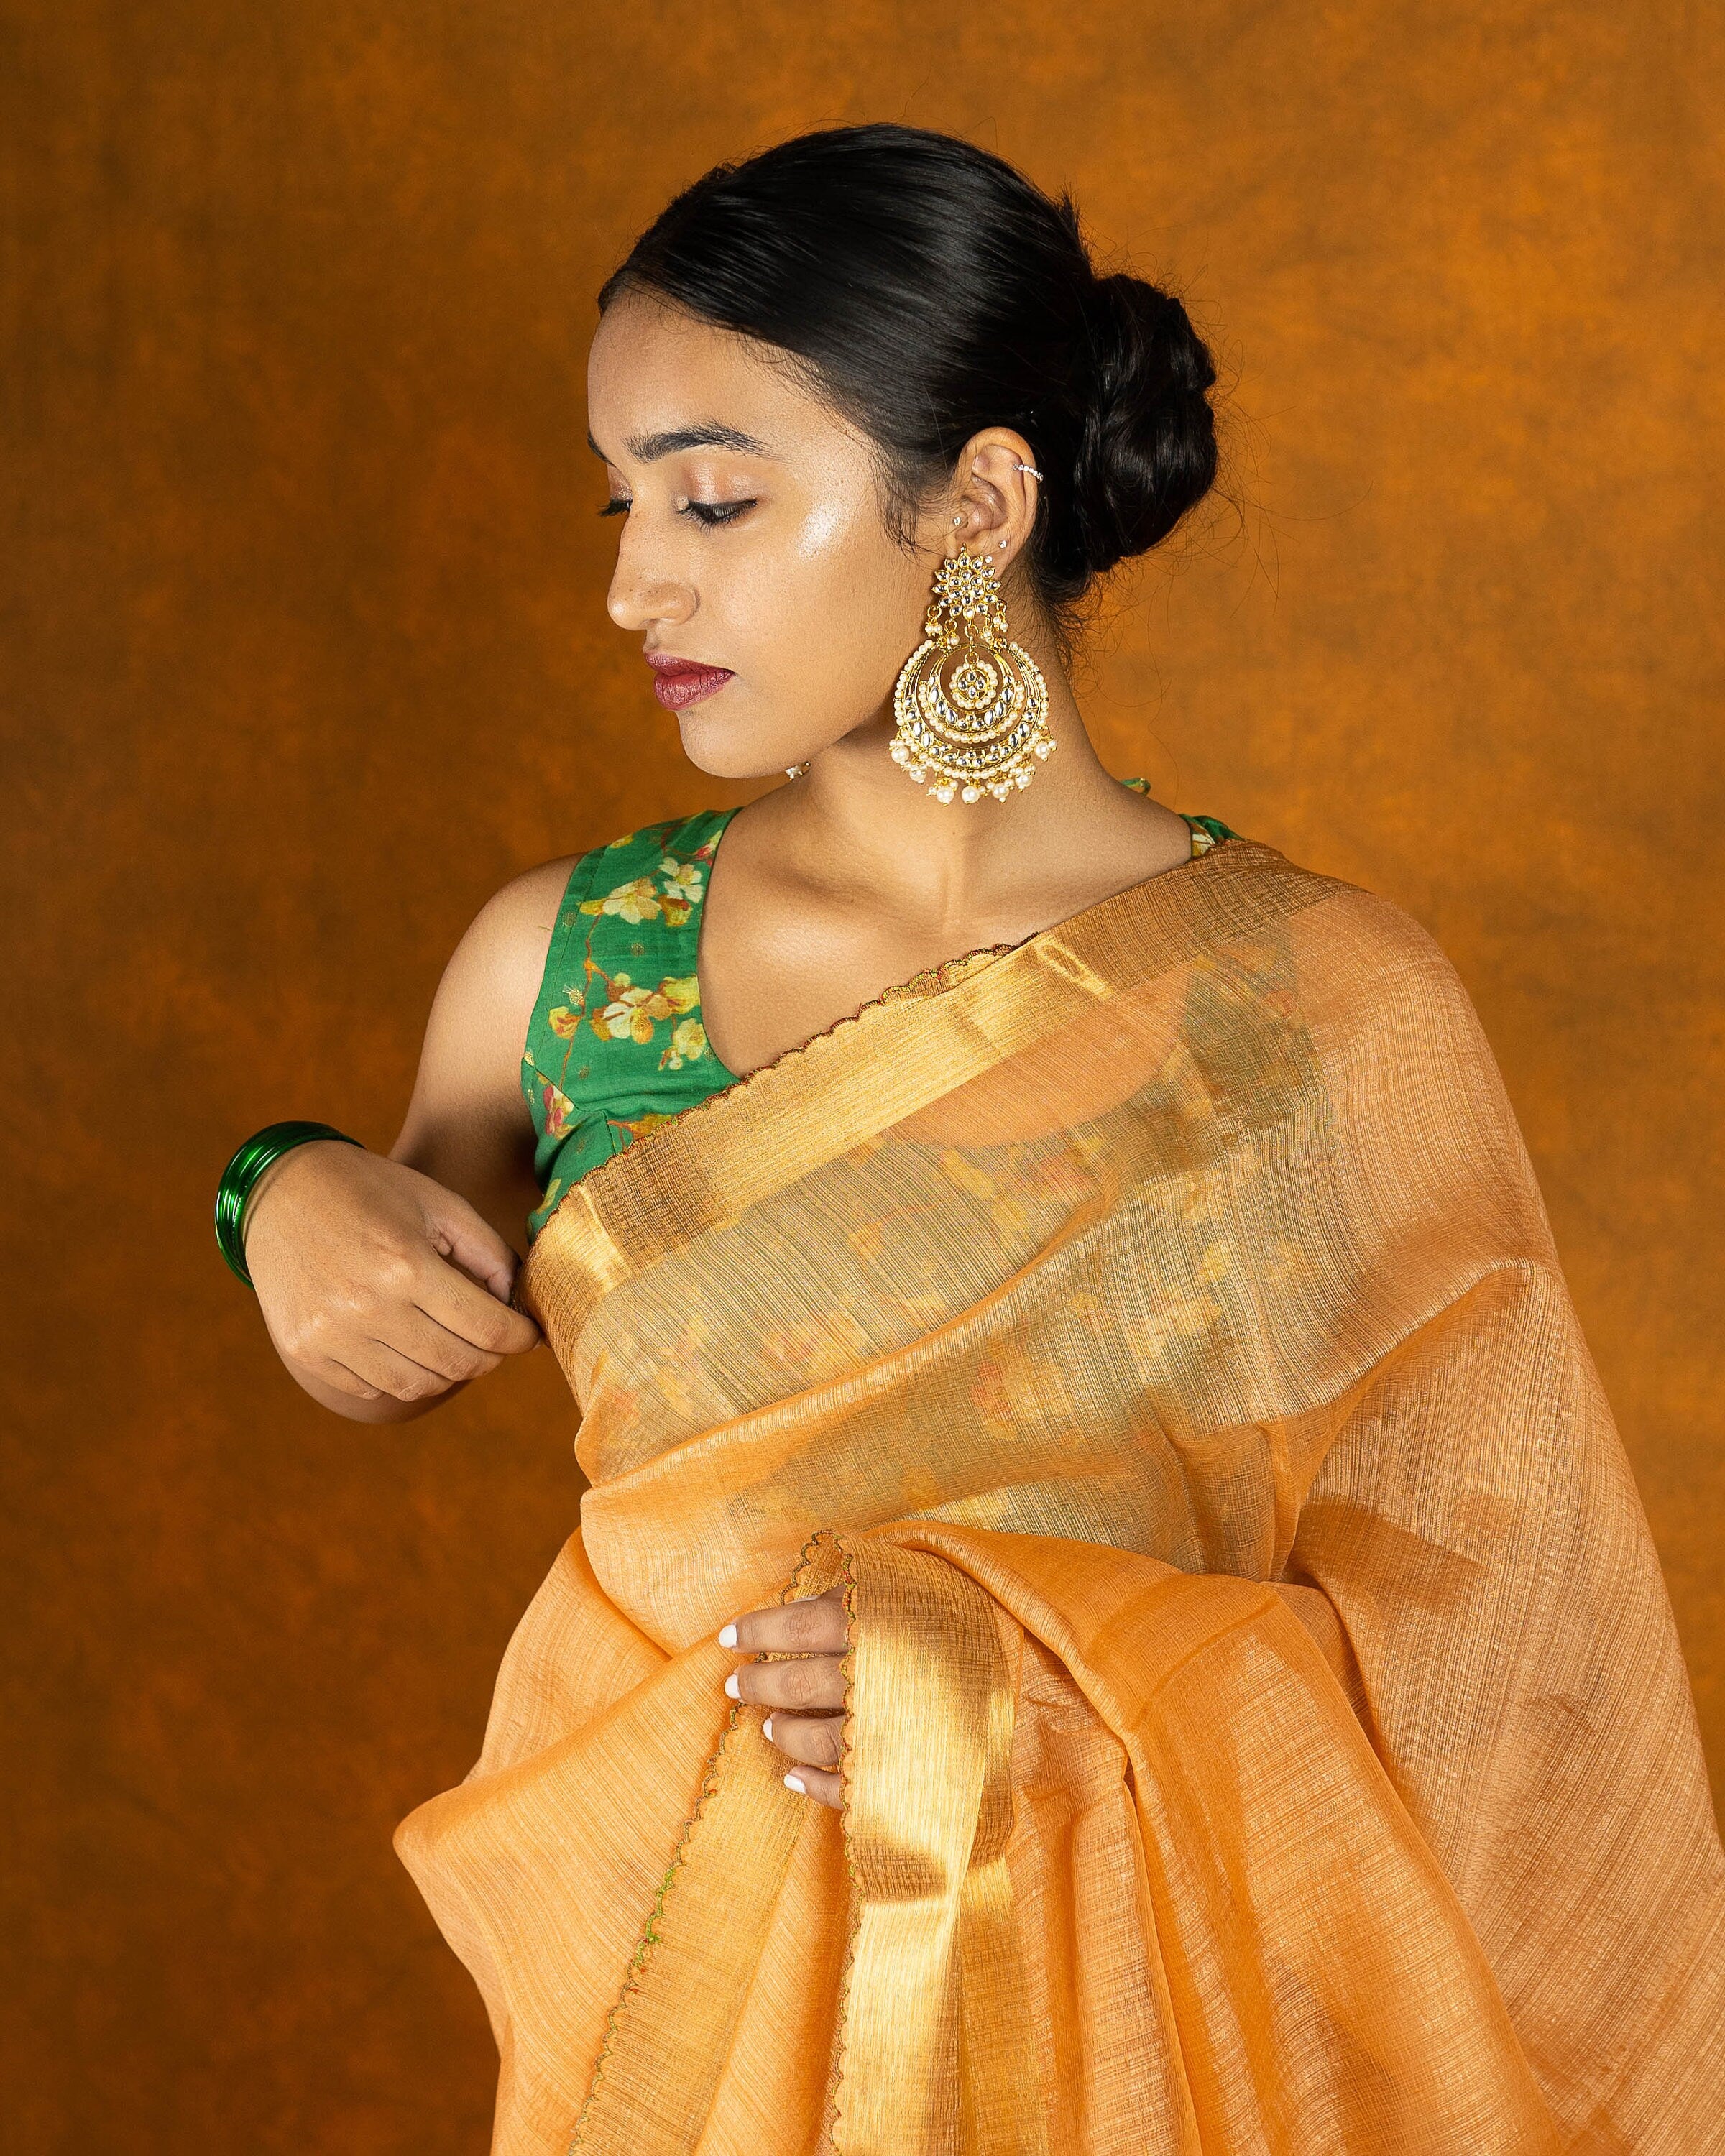 Peach Orange embroidery mirror-work saree with gold border and tassels